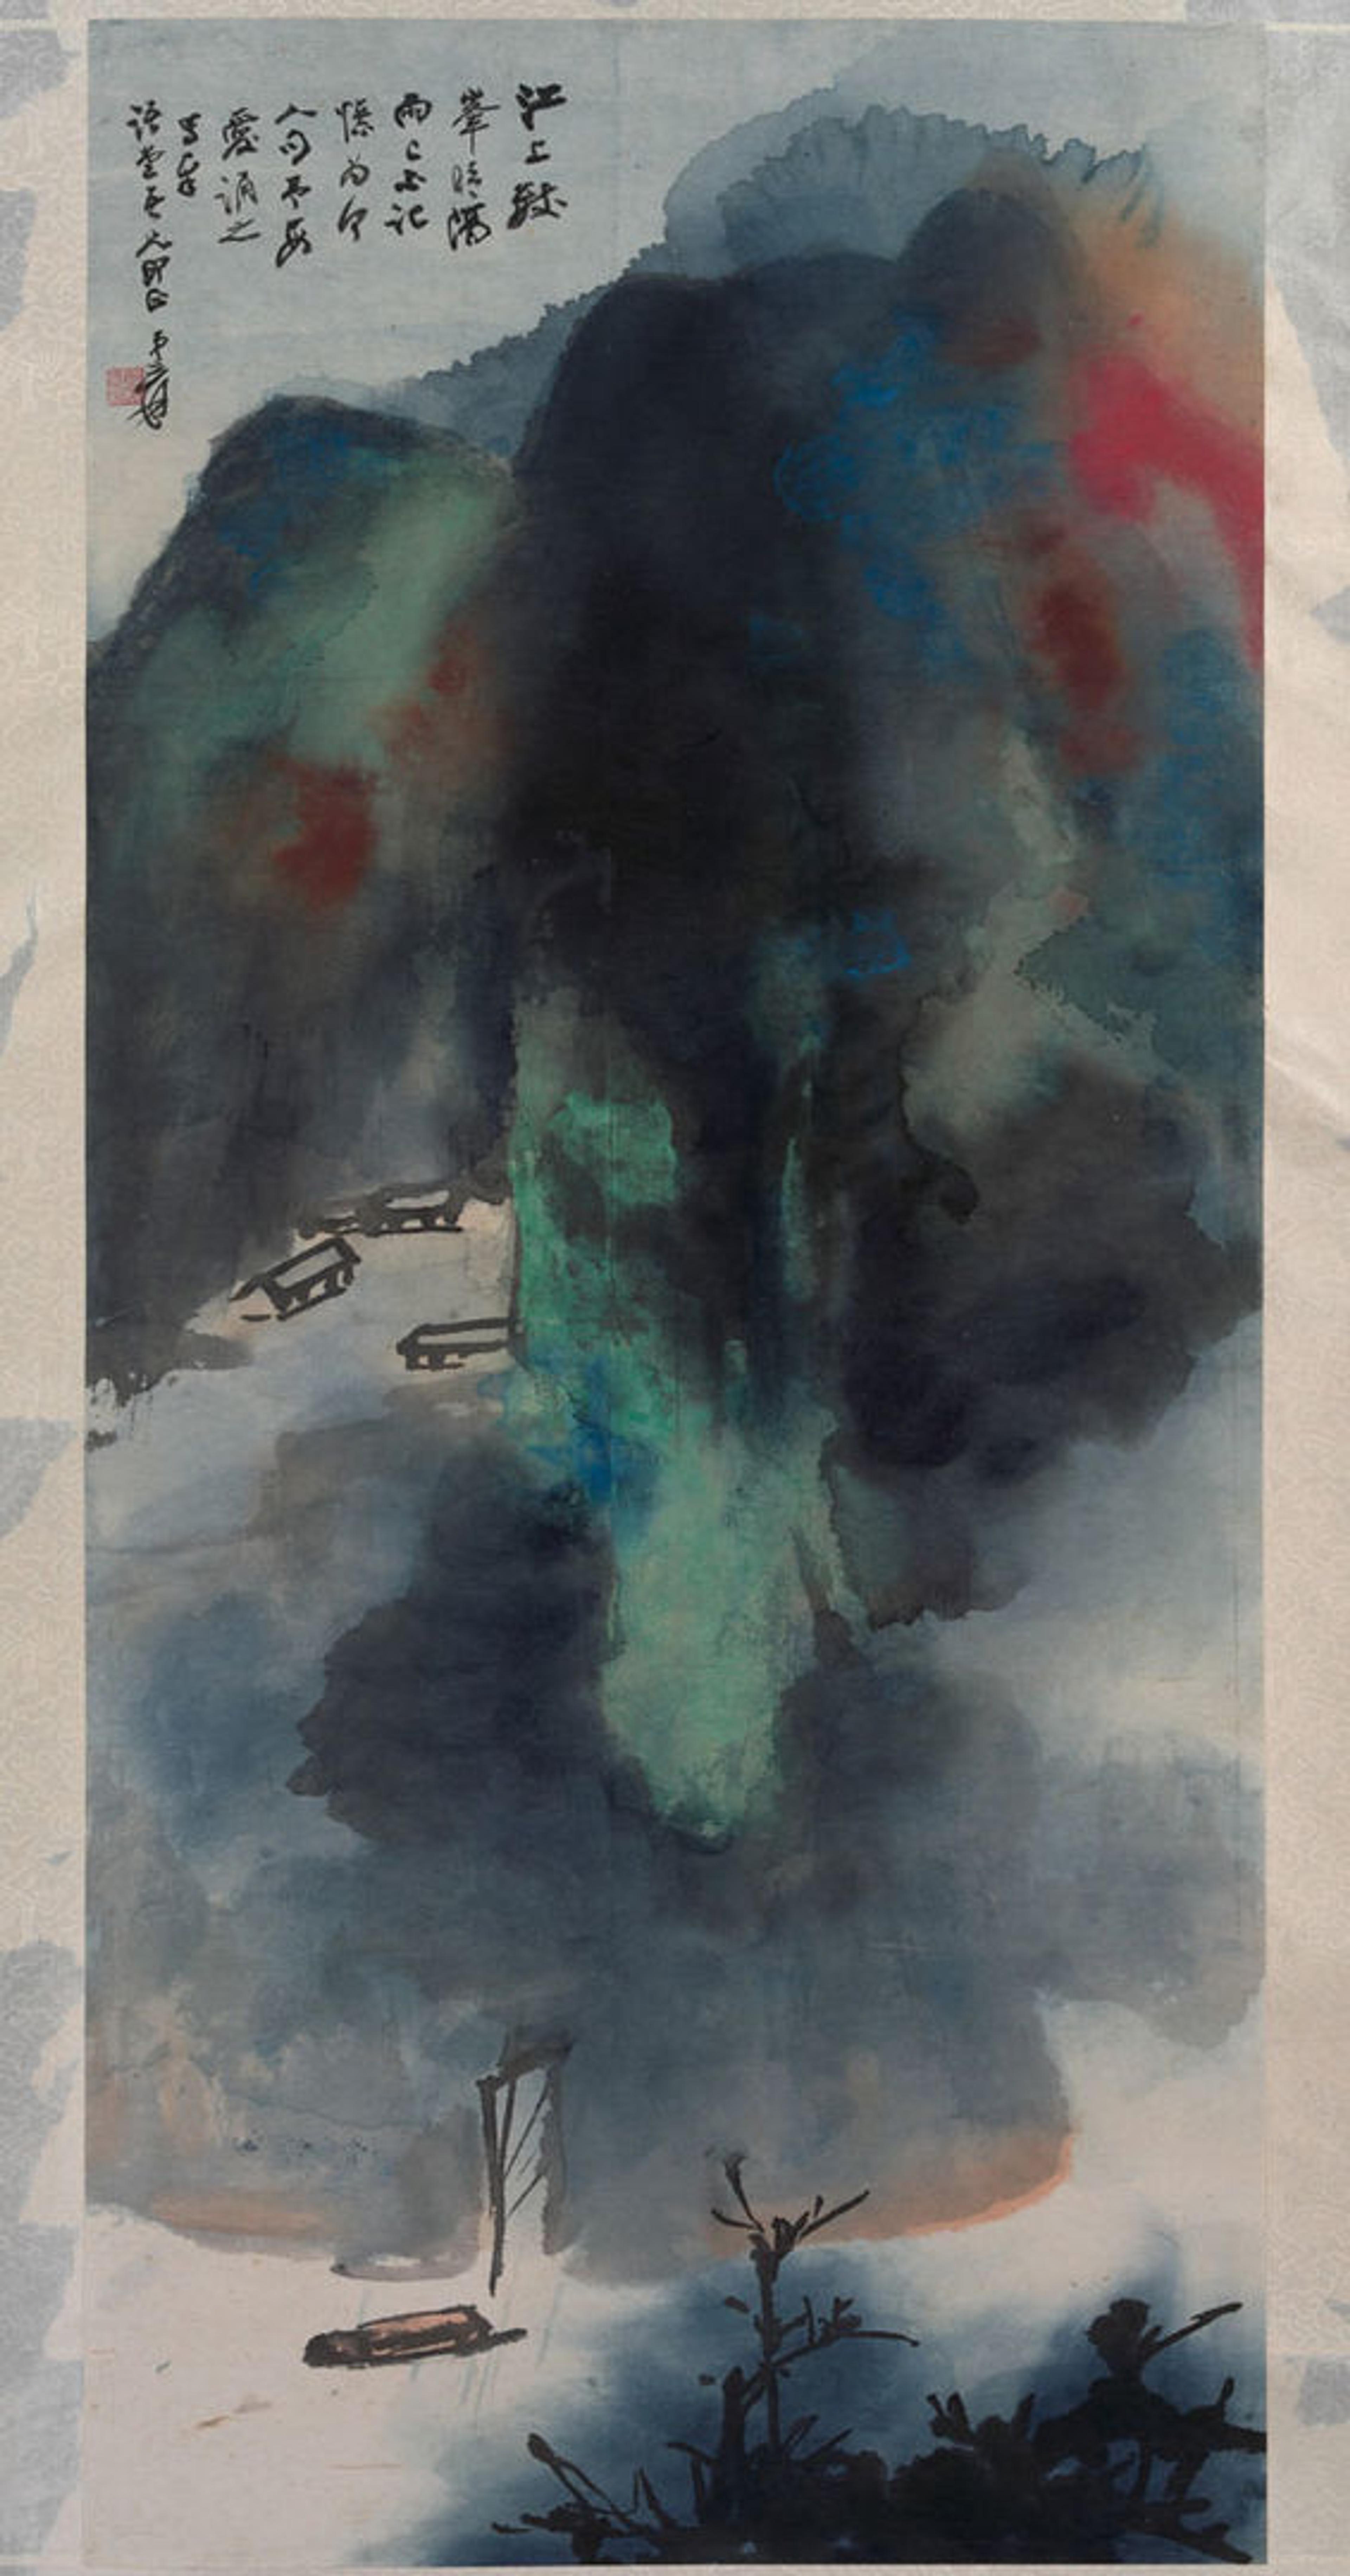 Zhang Daqian (Chinese, 1899–1983). Mountains Clearing after Rain, ca. 1965–70. China. Hanging scroll, ink and color on paper; 52 x 23 1/2 in. (132.1 x 59.7 cm). The Metropolitan Museum of Art, New York, The Lin Yutang Family Collection, Gift of Hsiang Ju Lin in memory of Taiyi Lin Lai, 2005 (2005.510.5)